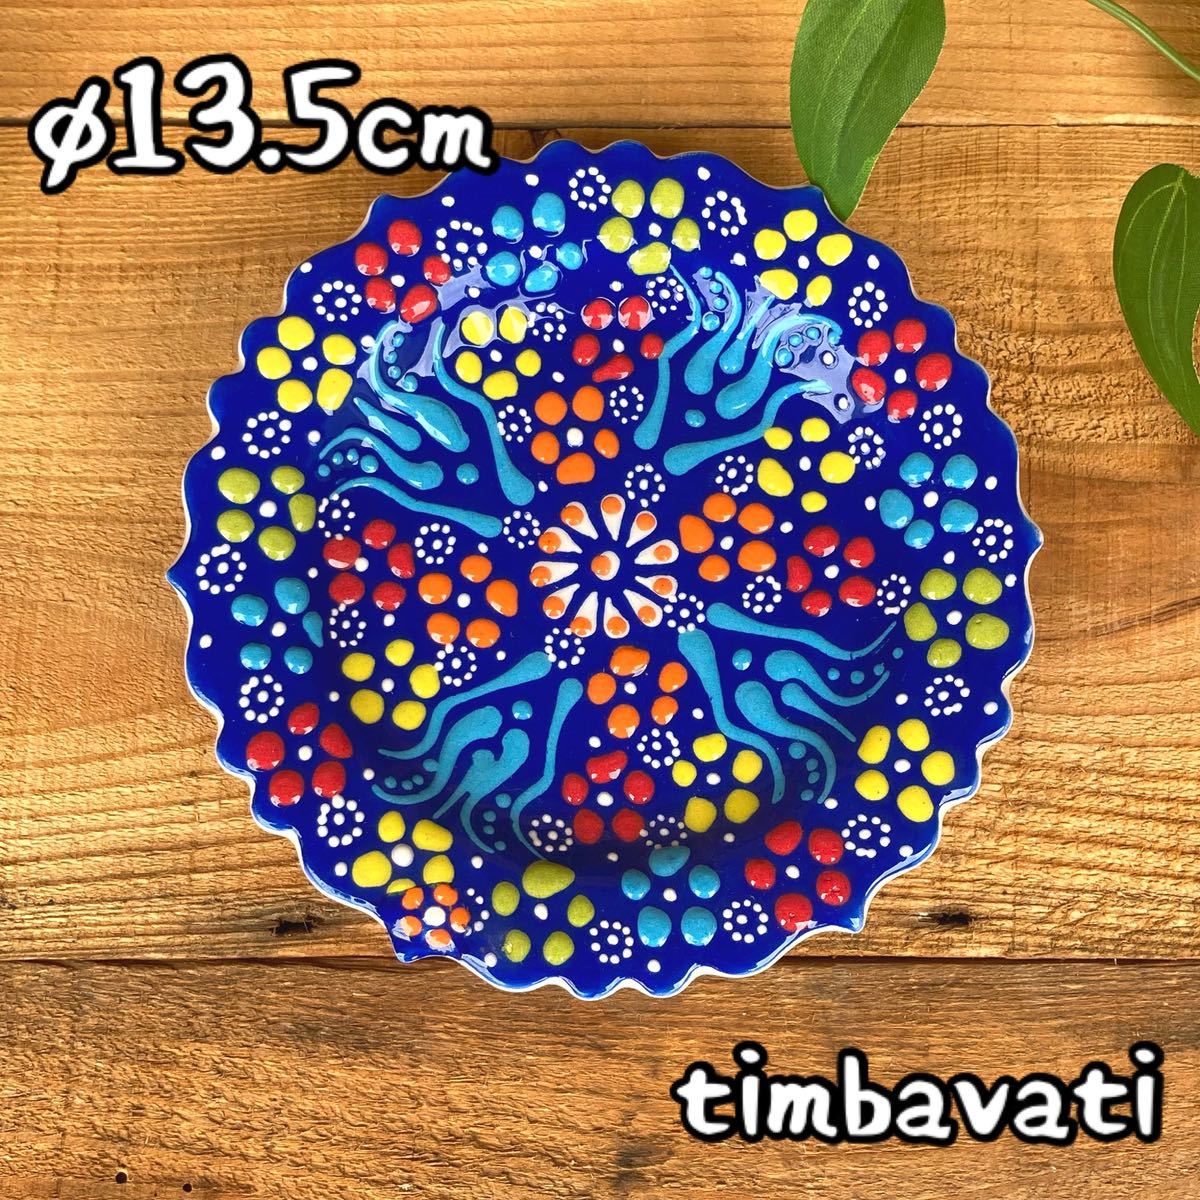 13.5cm☆Brand new☆Turkish pottery medium plate, small plate, wall hanging *Blue* Handmade Kutahya pottery 058, Western-style tableware, plate, dish, others